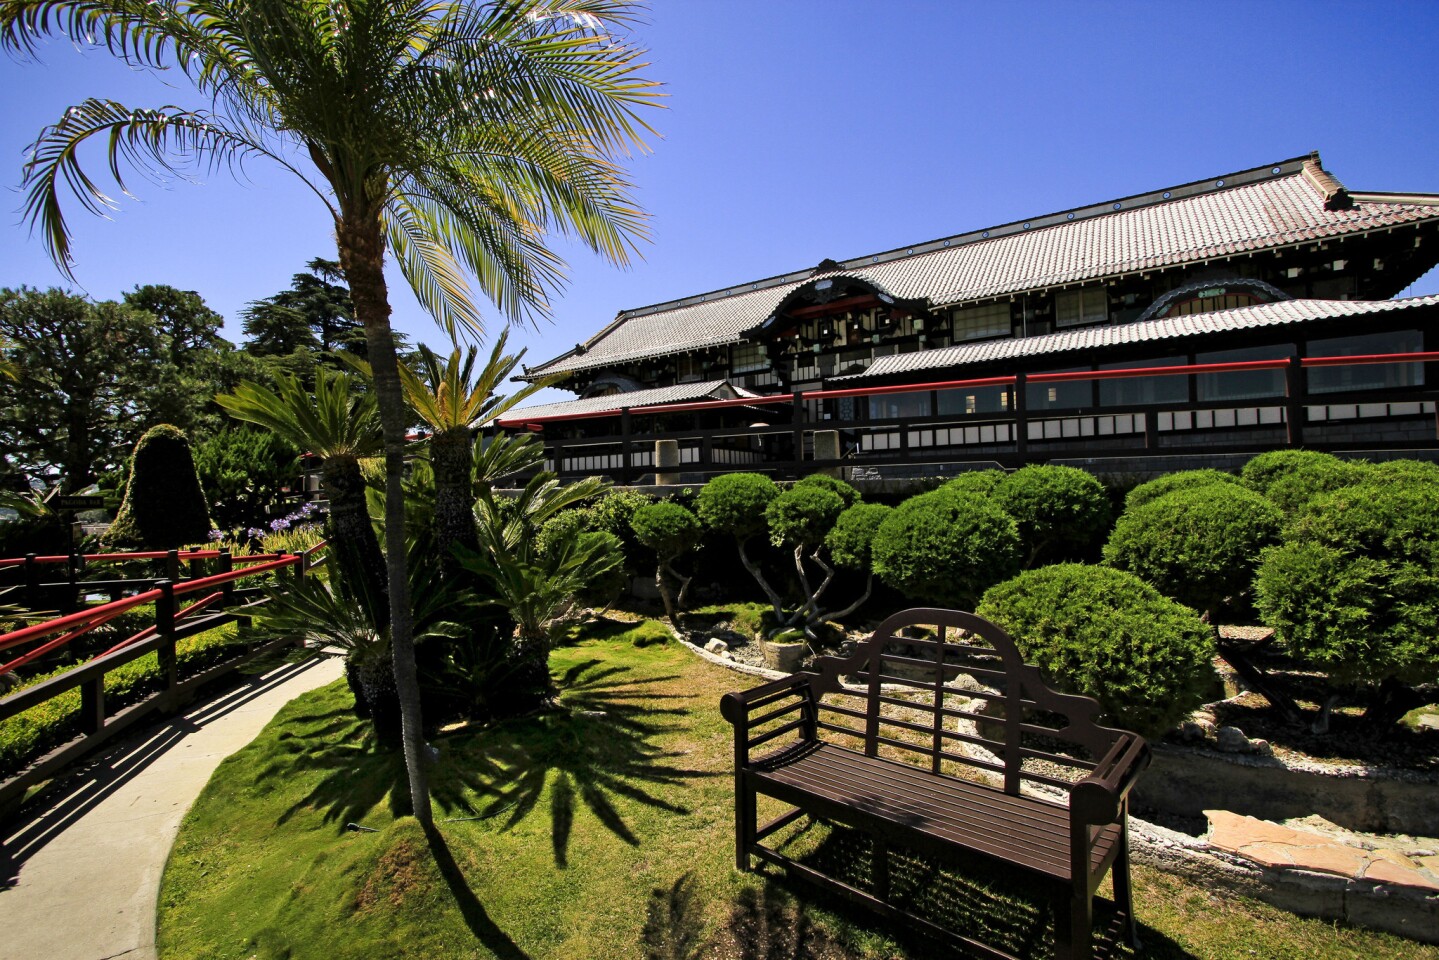 Yamashiro restaurant and garden, in the Hollywood Hills. Built from 1911 to 1914, Yamashiro is a replica of a palace located in the mountains of the former Yamashiro Province near Kyoto, Japan.